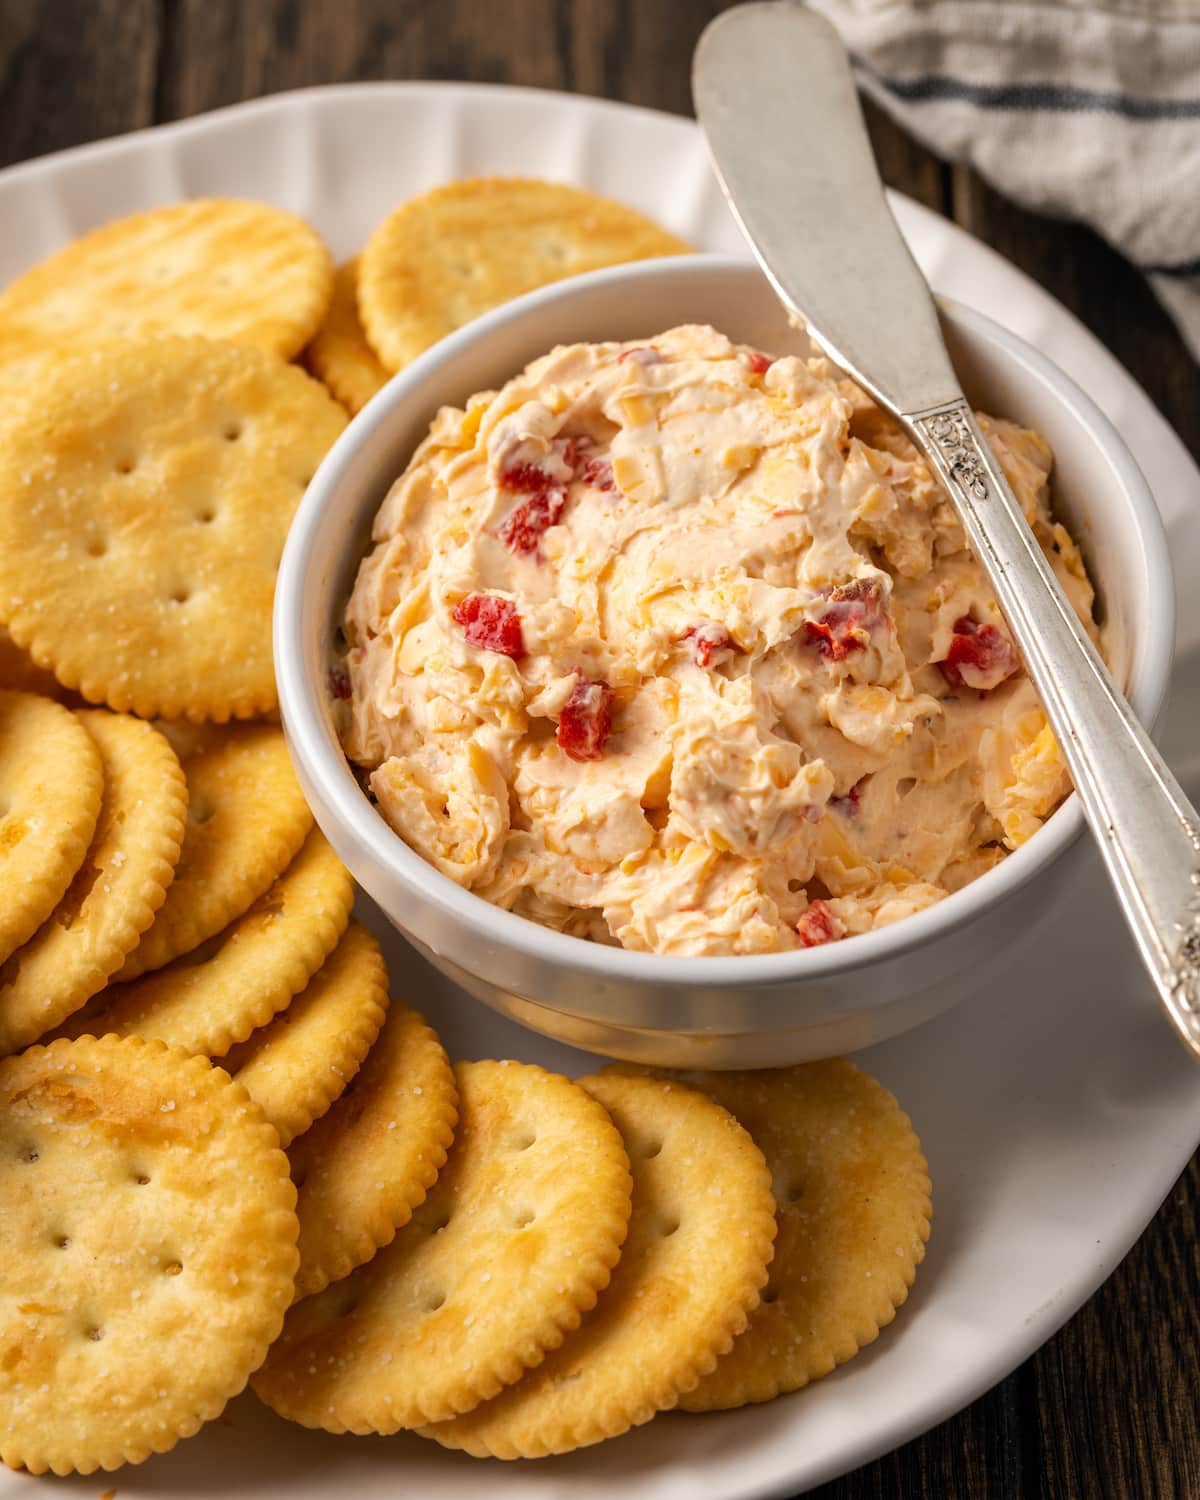 A bowl of pimento cheese served with a cheese knife on a platter of crackers.